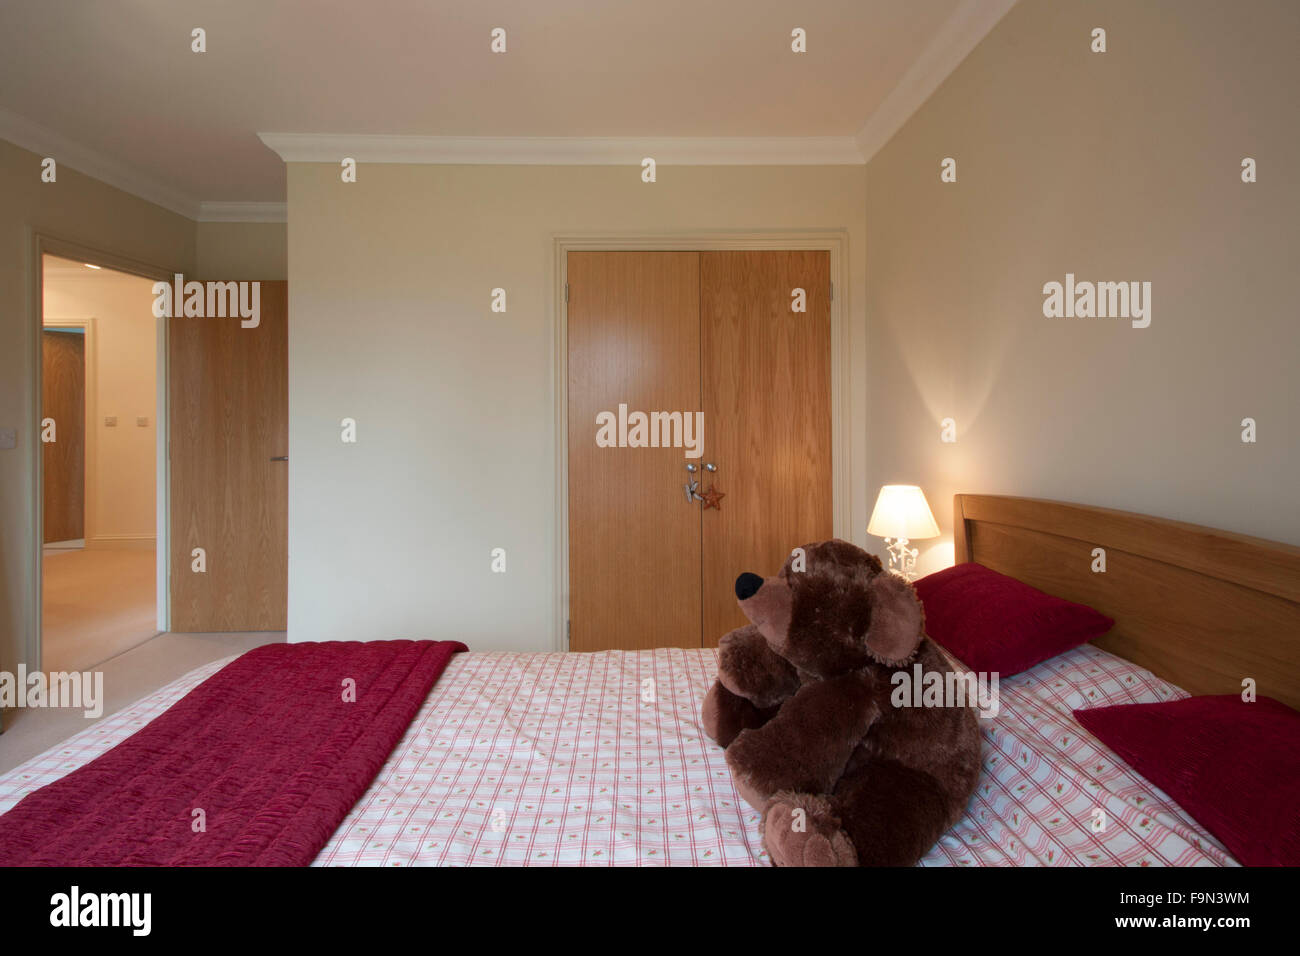 Guest bedroom with a red colour scheme Stock Photo